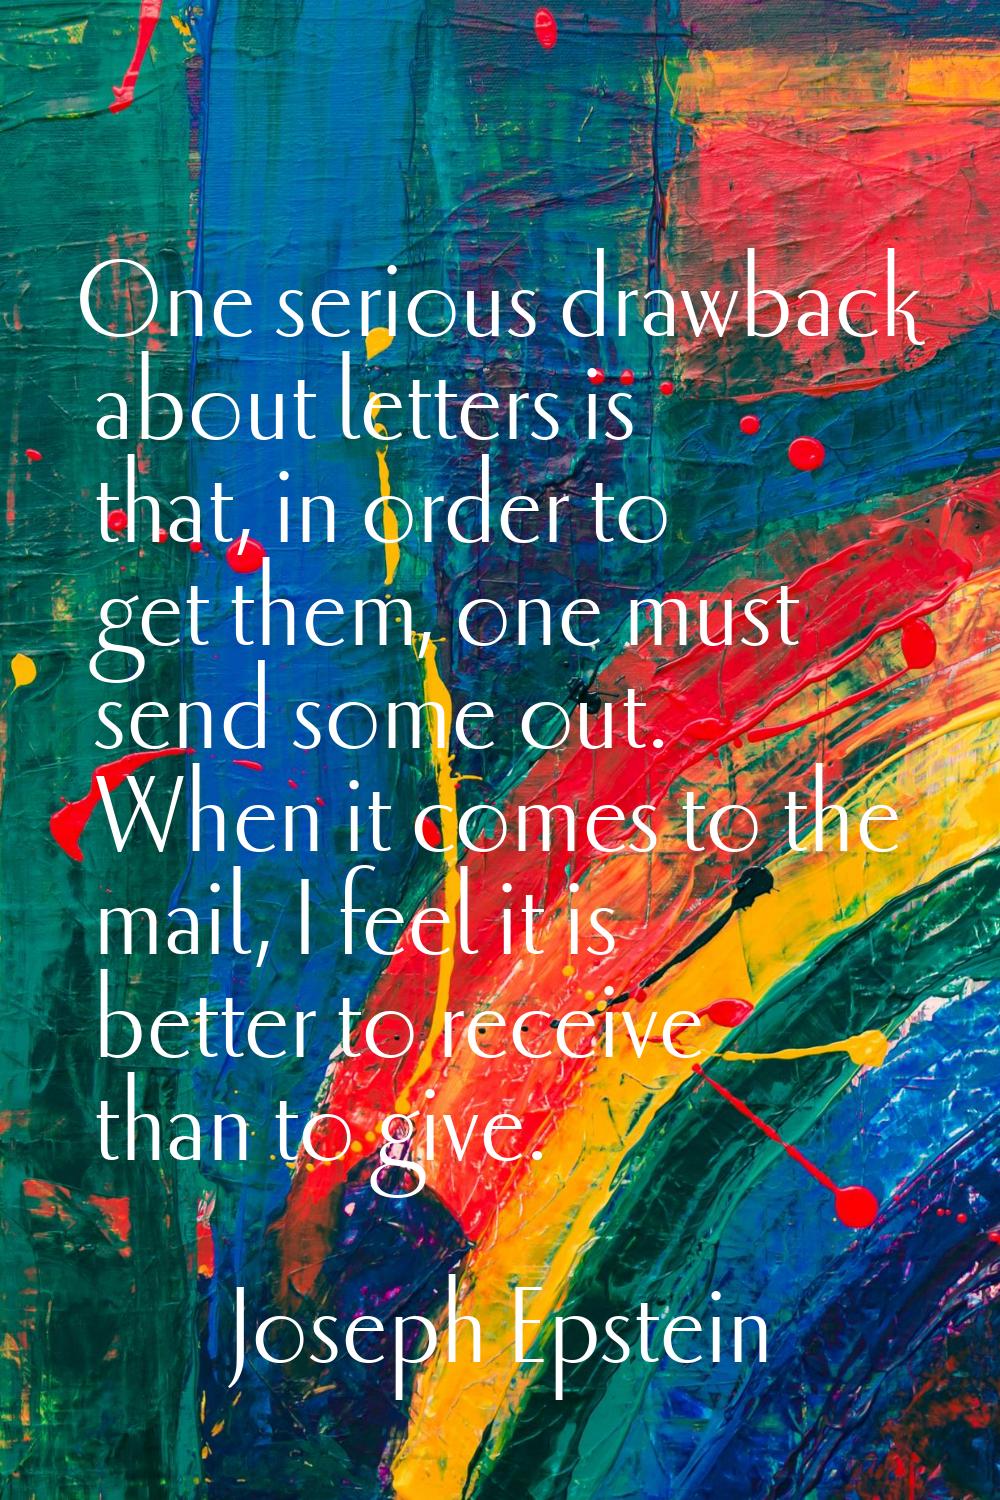 One serious drawback about letters is that, in order to get them, one must send some out. When it c